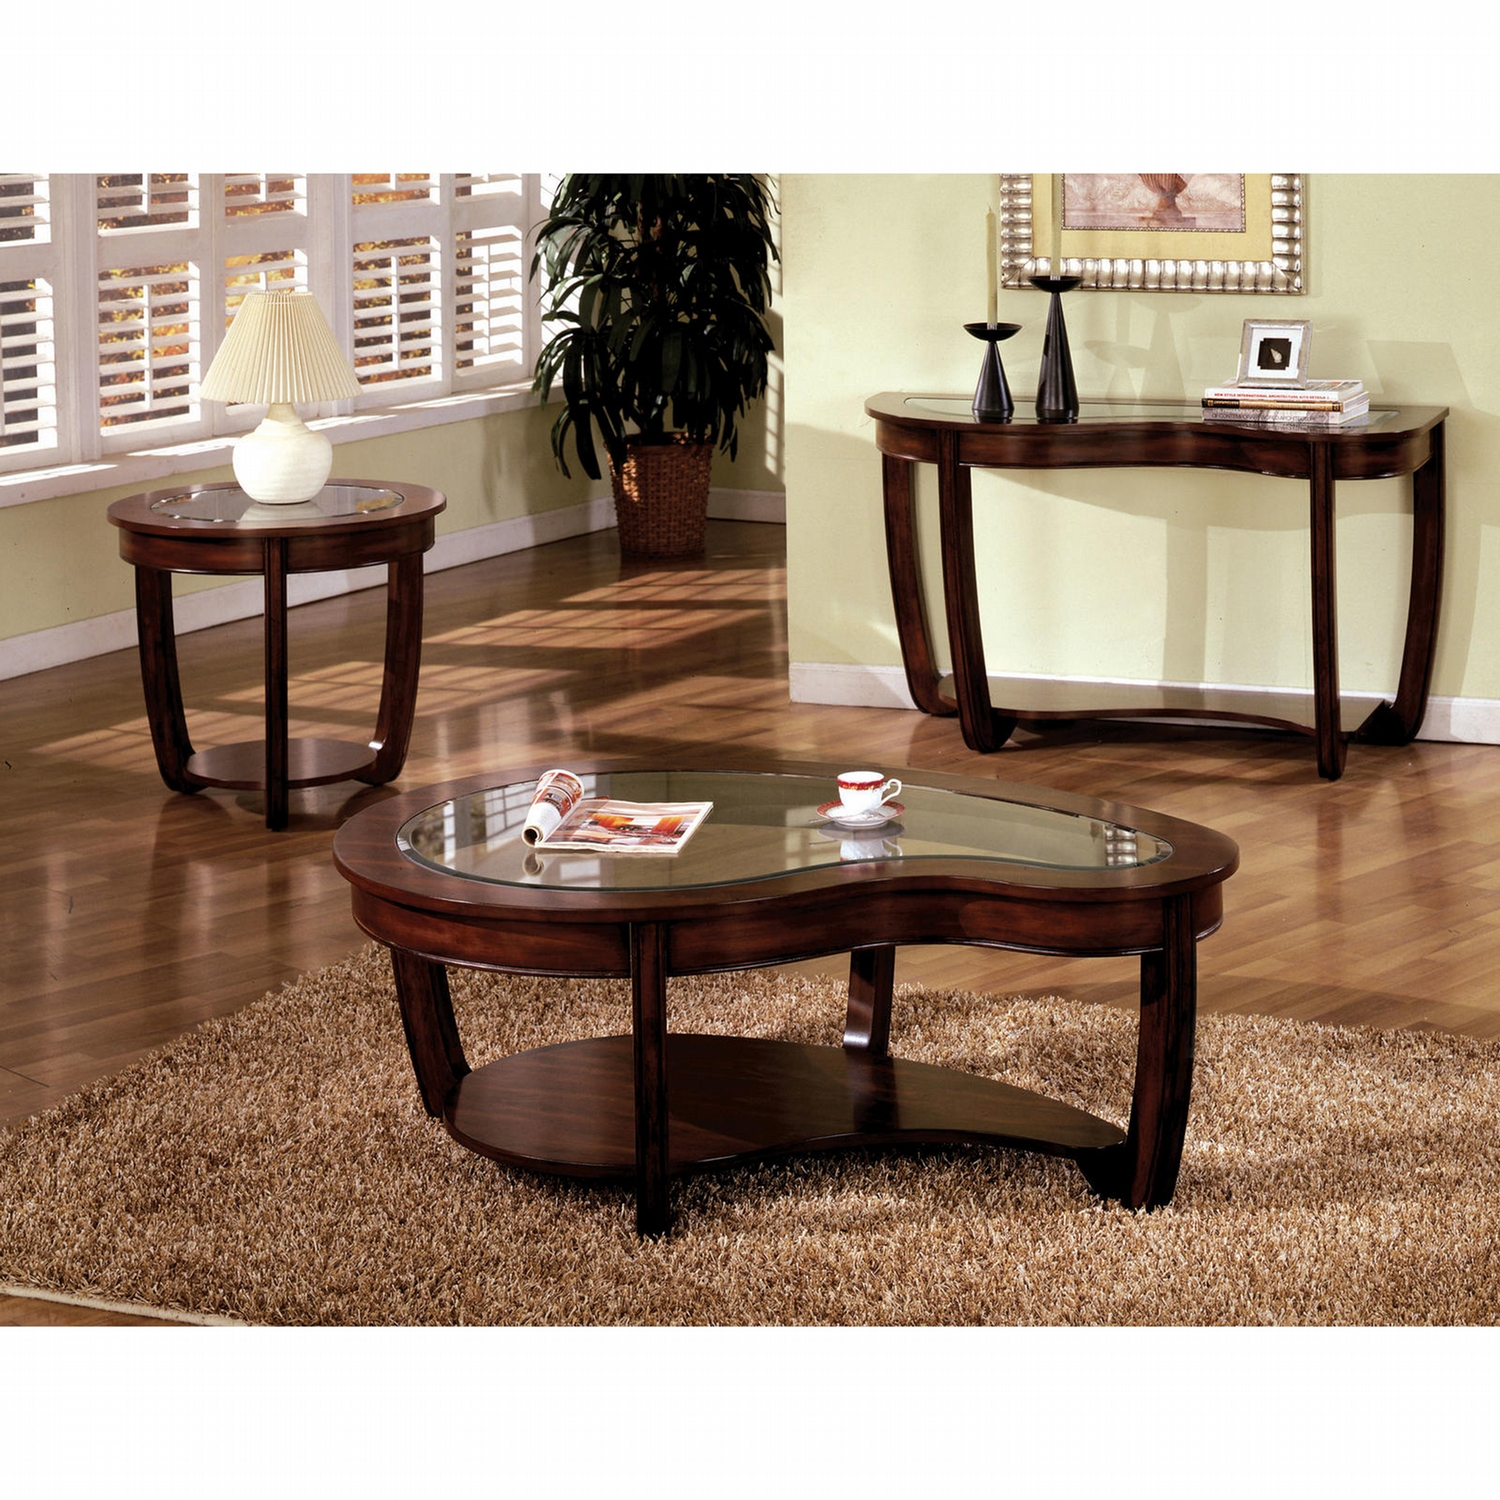 furniture america dark cherry coleen piece accent table set get rustic oak dining small round pedestal side baroque bedside battery operated lamp with timer monarch mirrored large